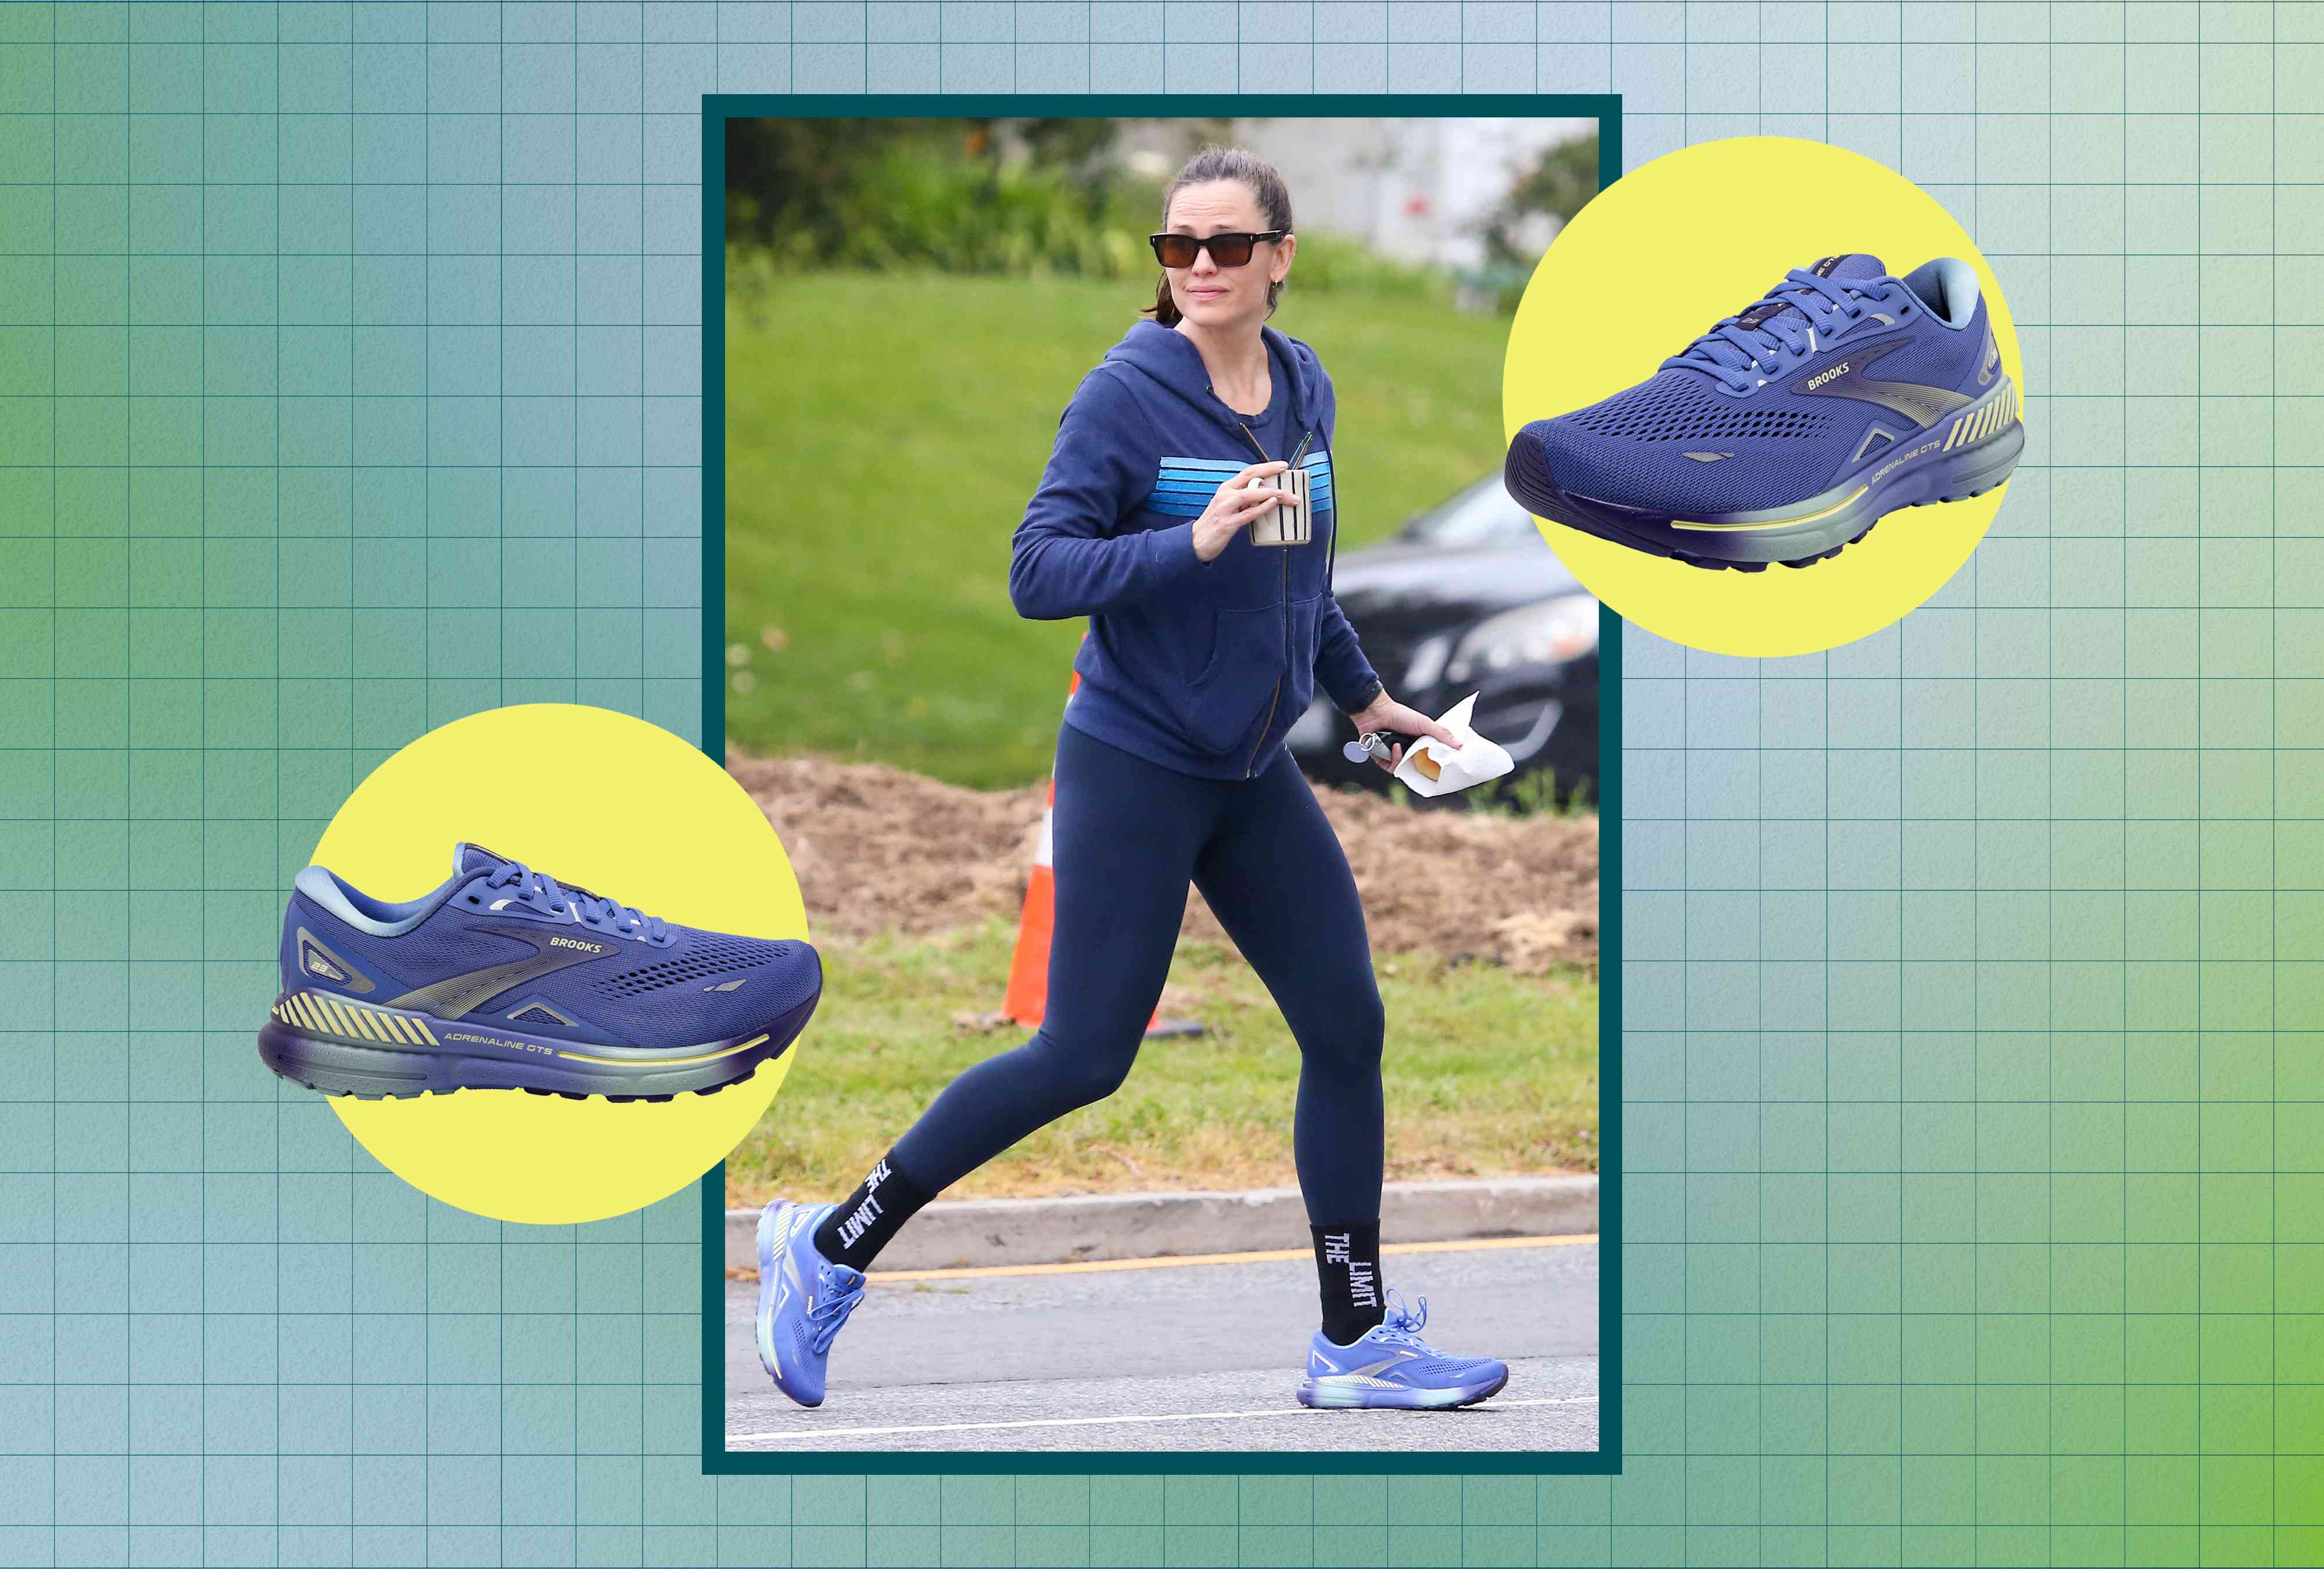 Jennifer Garner Has Been Spotted Wearing the Latest Version of These Editor-Loved Sneakers